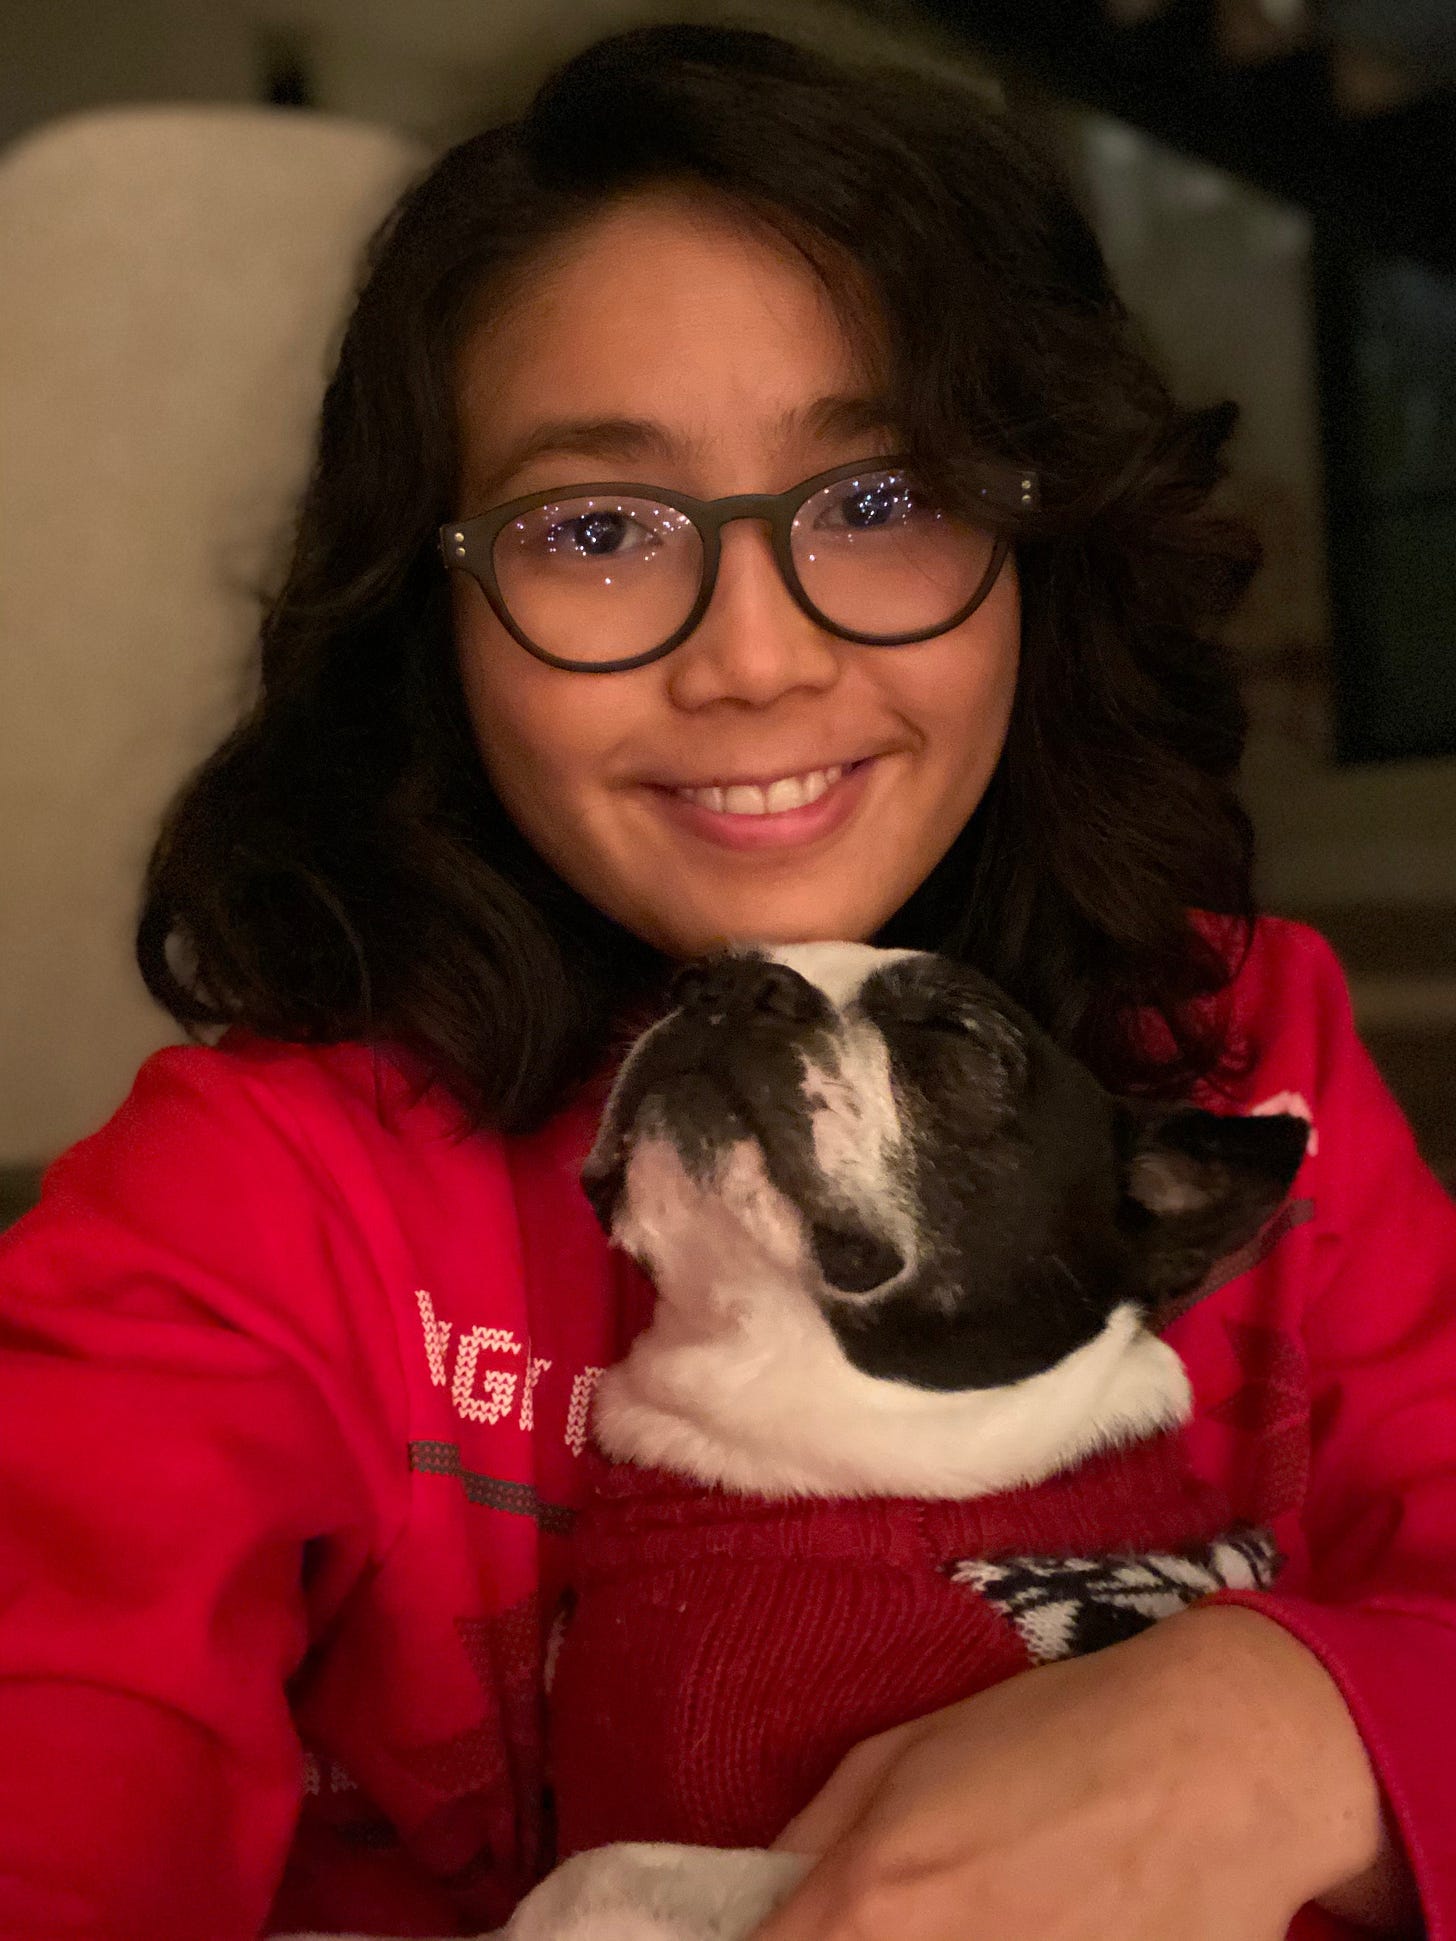 A curly-haired girl with glasses (me!) holds a sleepy black-and-white boston terrier. We're both wearing red sweaters.